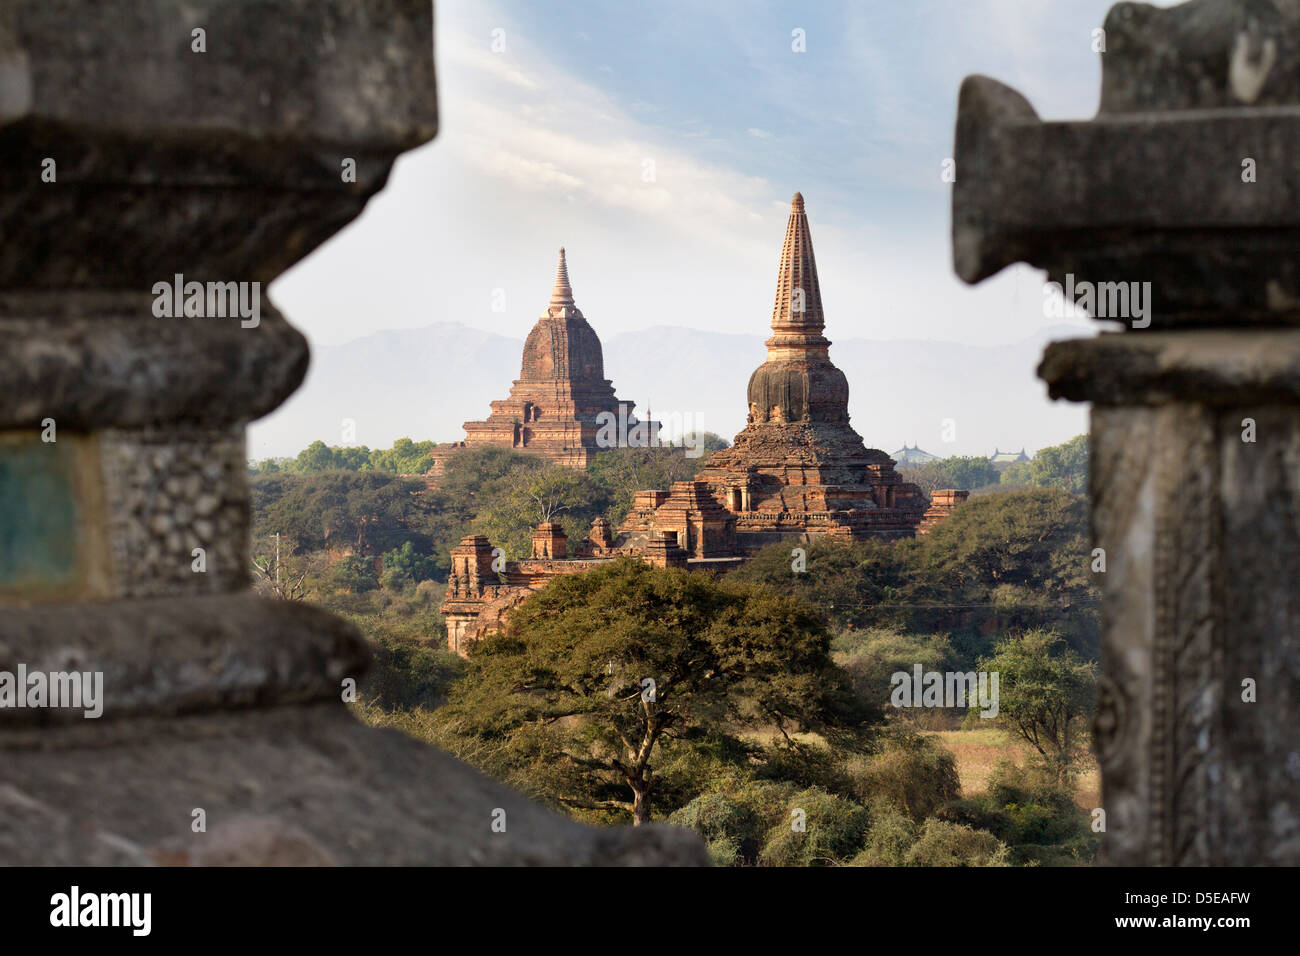 The Temples and Pagodas of Bagan, Myanmar - early morning Stock Photo